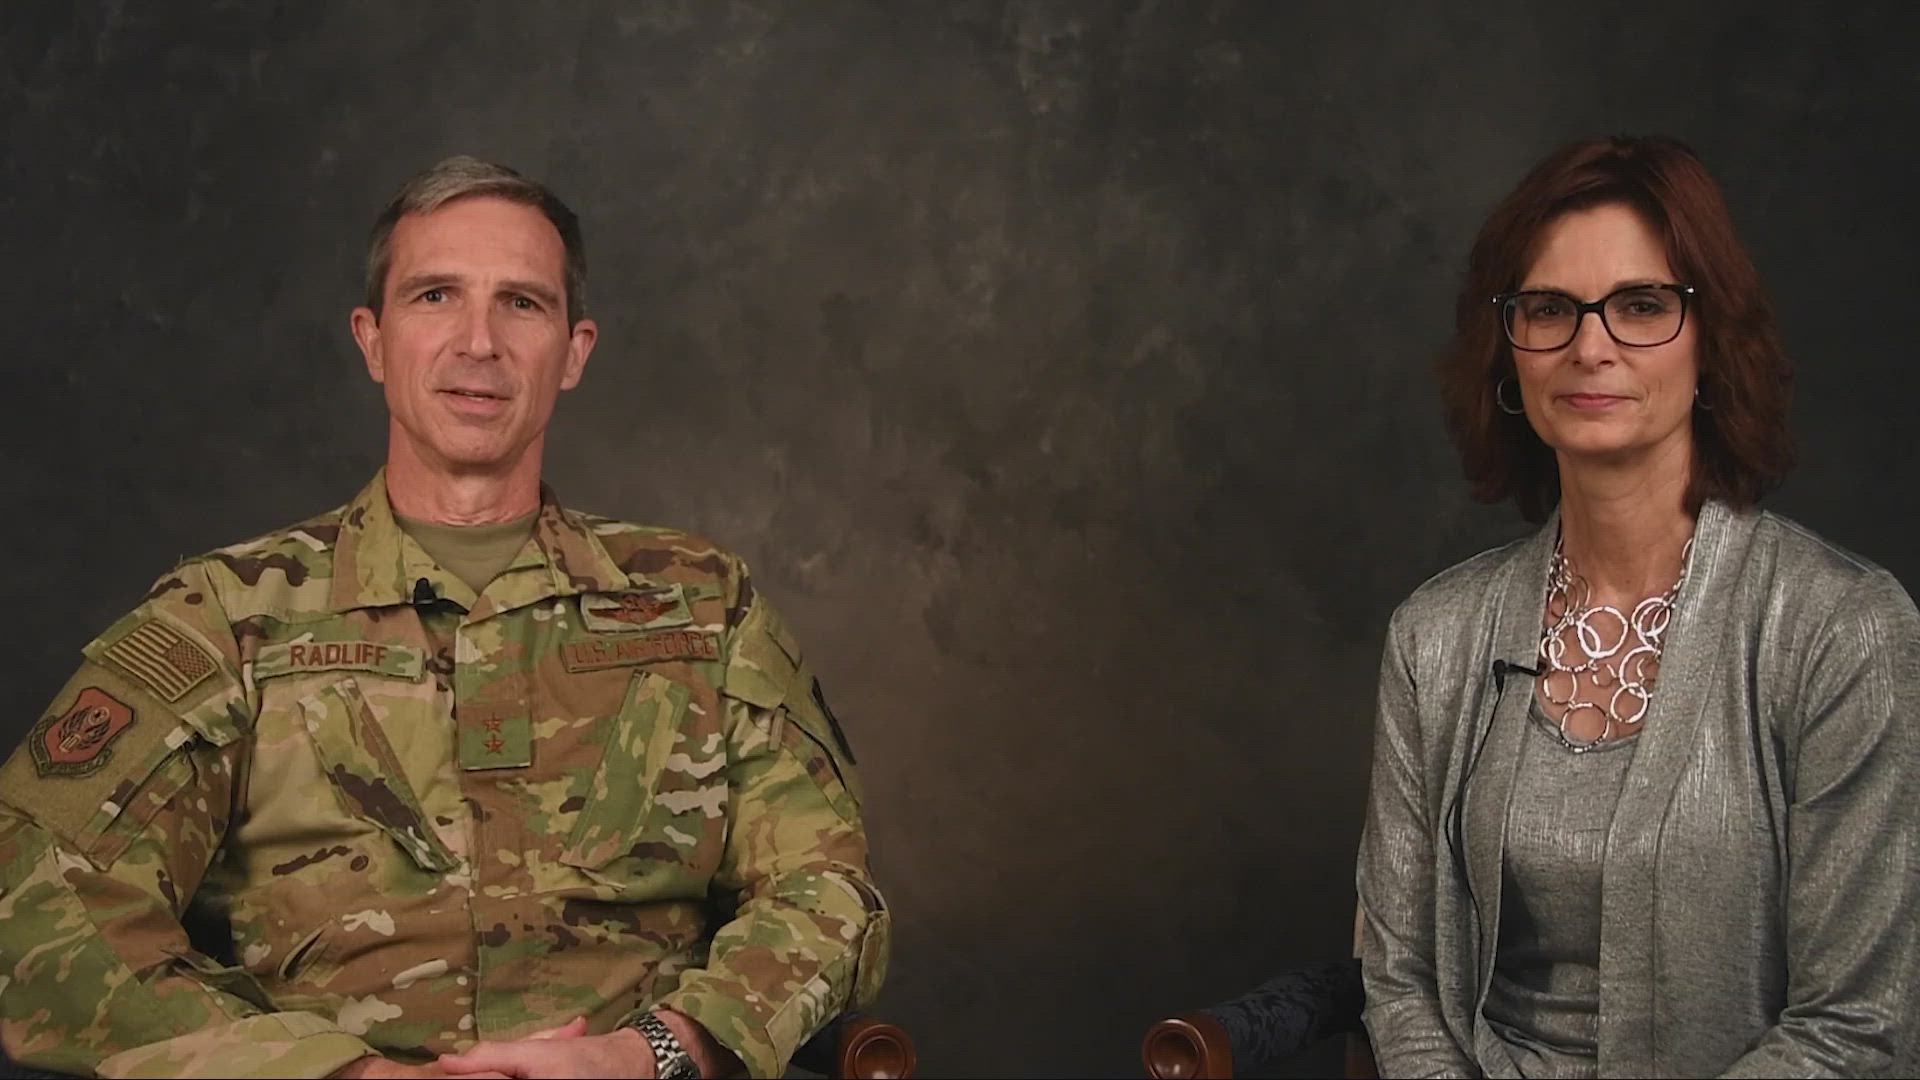 Maj Gen Bryan Radliff, Tenth Air Force Commander, and his wife, Mrs Lisa Radliff, Tenth Air Force Key Spouse, share a holiday greeting.